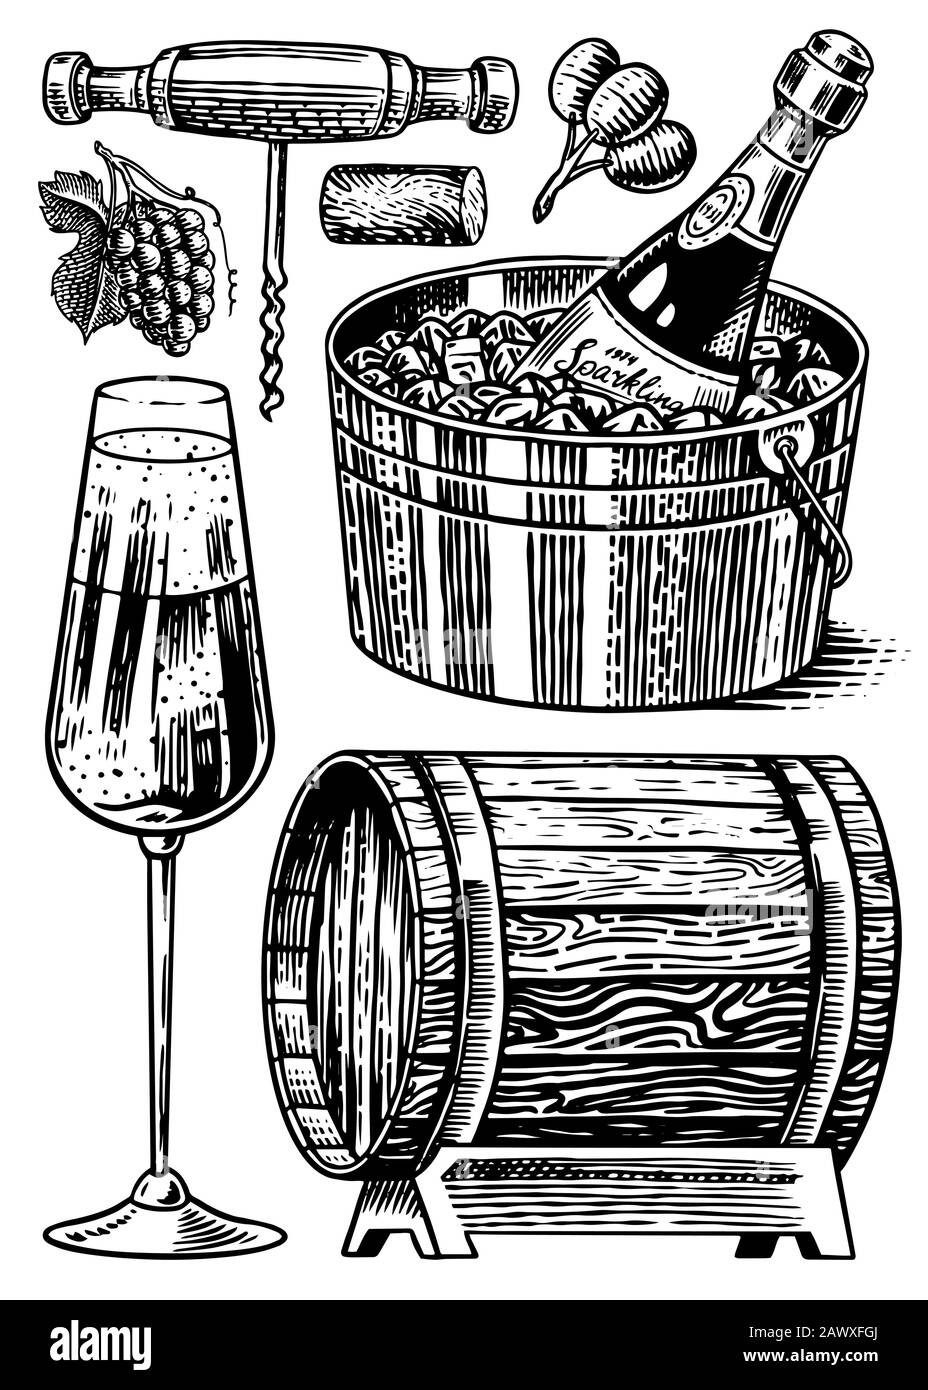 Sparkling wine champagne set. Alcoholic drink in the hand, bottle and glass Cheers, ice bucket, wooden barrel. Grapes Corkscrew Olives Cork. Drawn Stock Vector